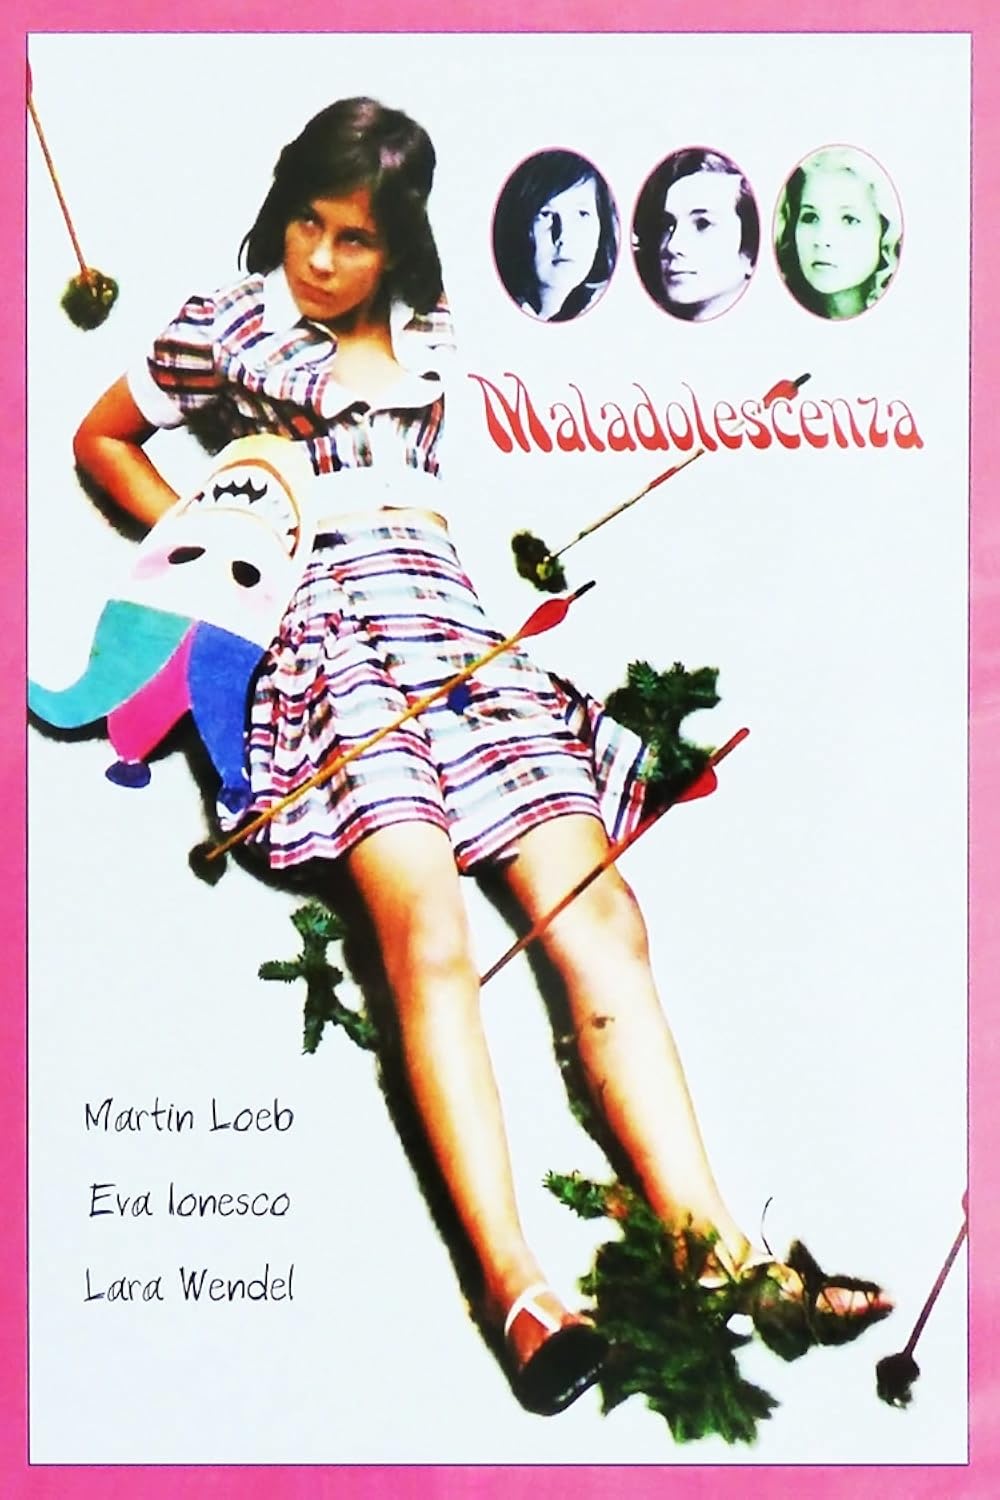 cindy lee bates recommends Movies Like Maladolescenza